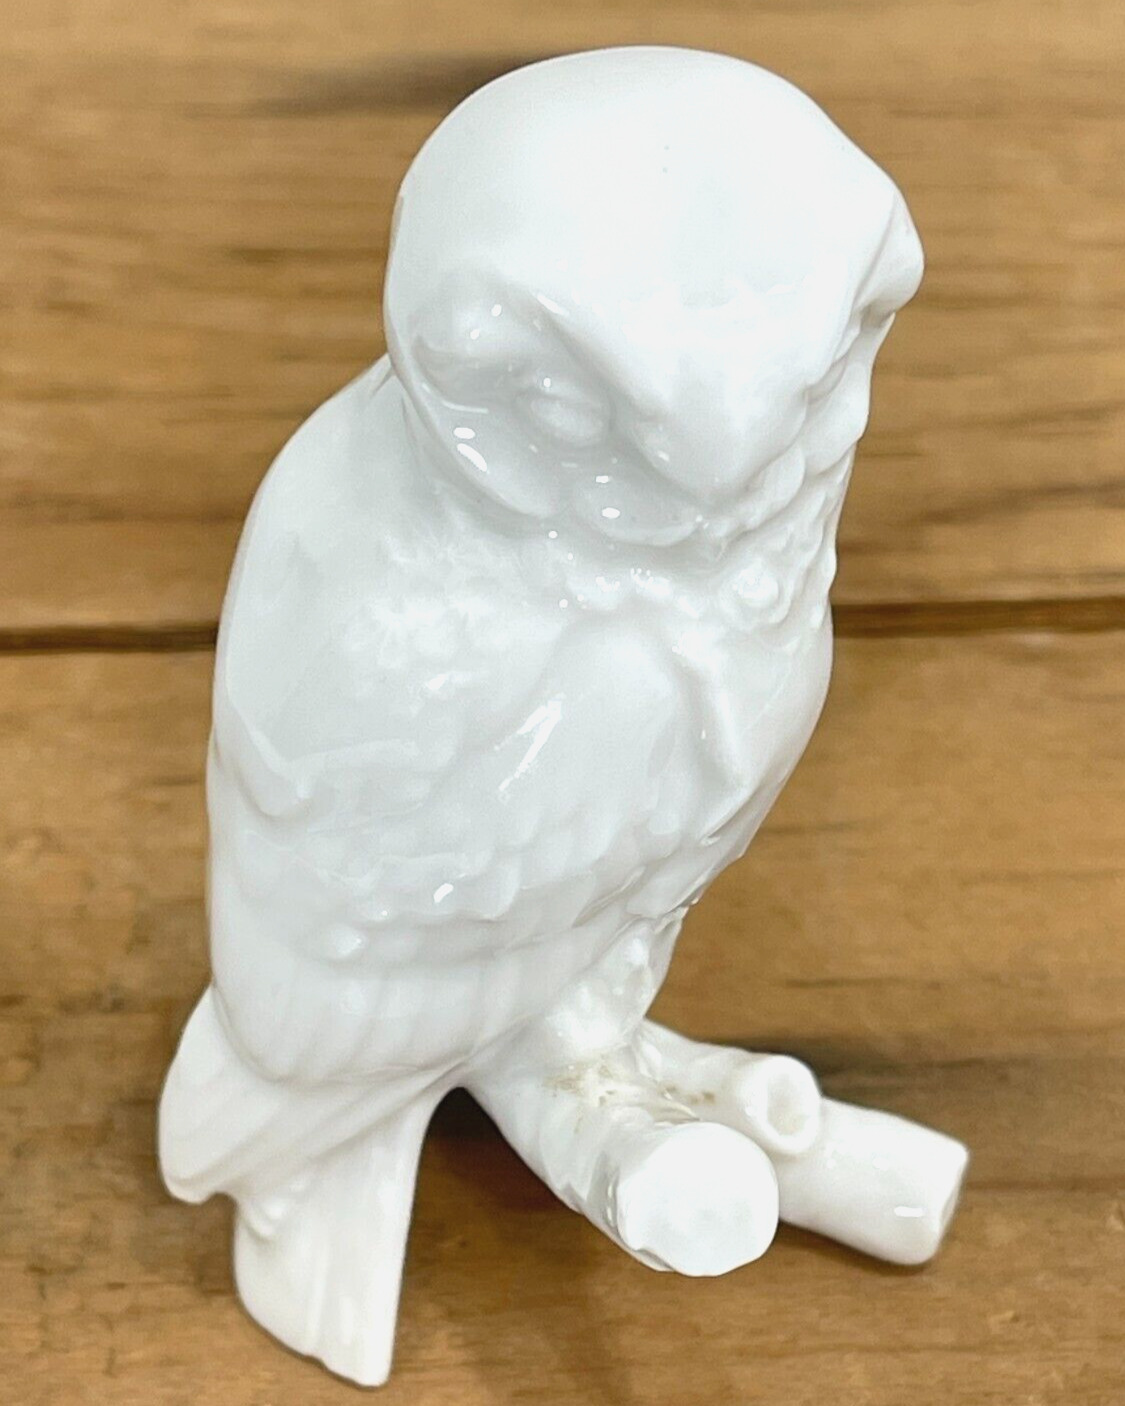 OWL Miniature Porcelain Figurine by Hutschenreuther 1814 Germany